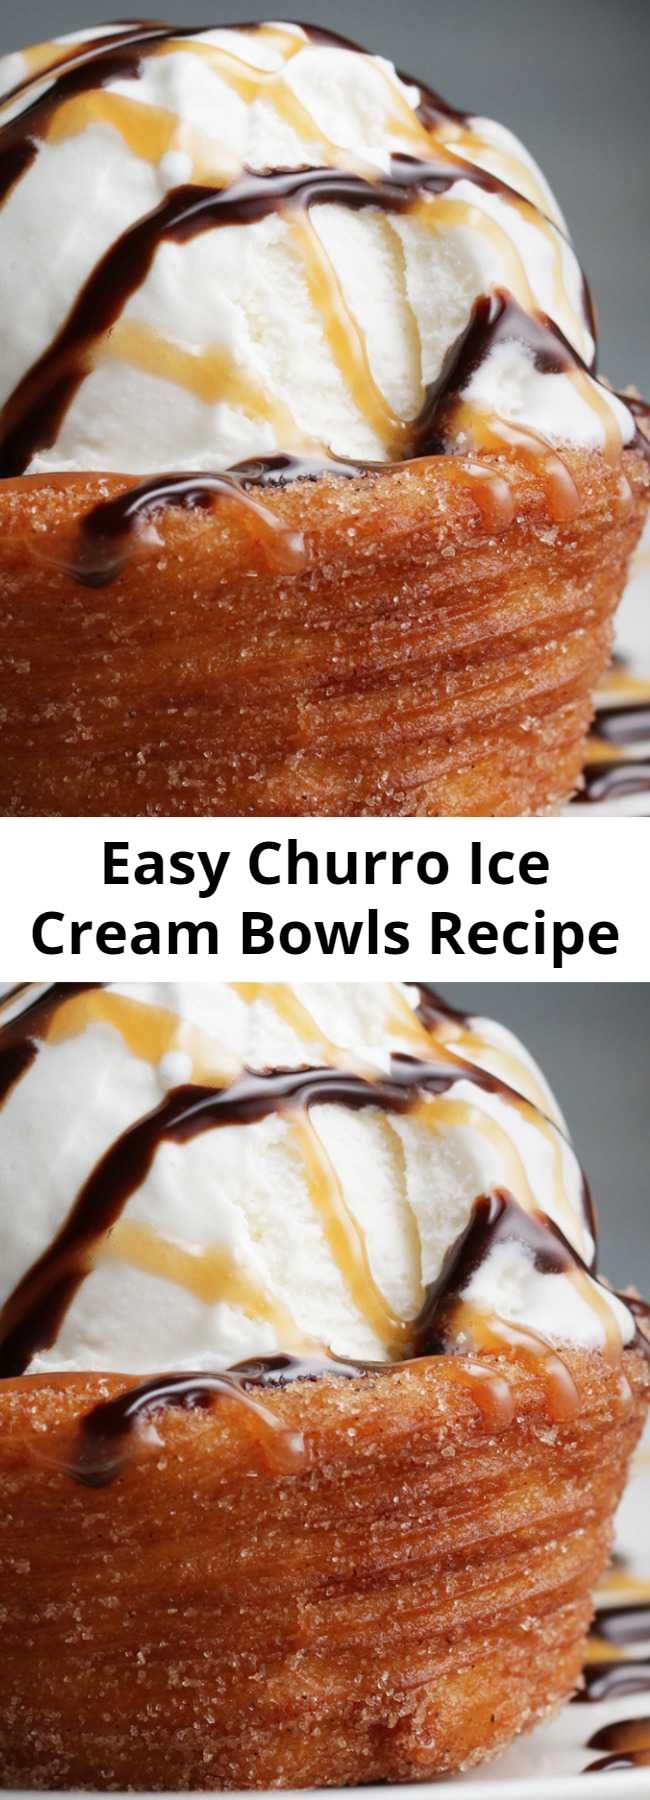 Easy Churro Ice Cream Bowls Recipe - Add a lot of cooking spray to the pan! Also make sure the churro dough is completely frozen! This was so good! Try it with horchata ice cream 🍨😋